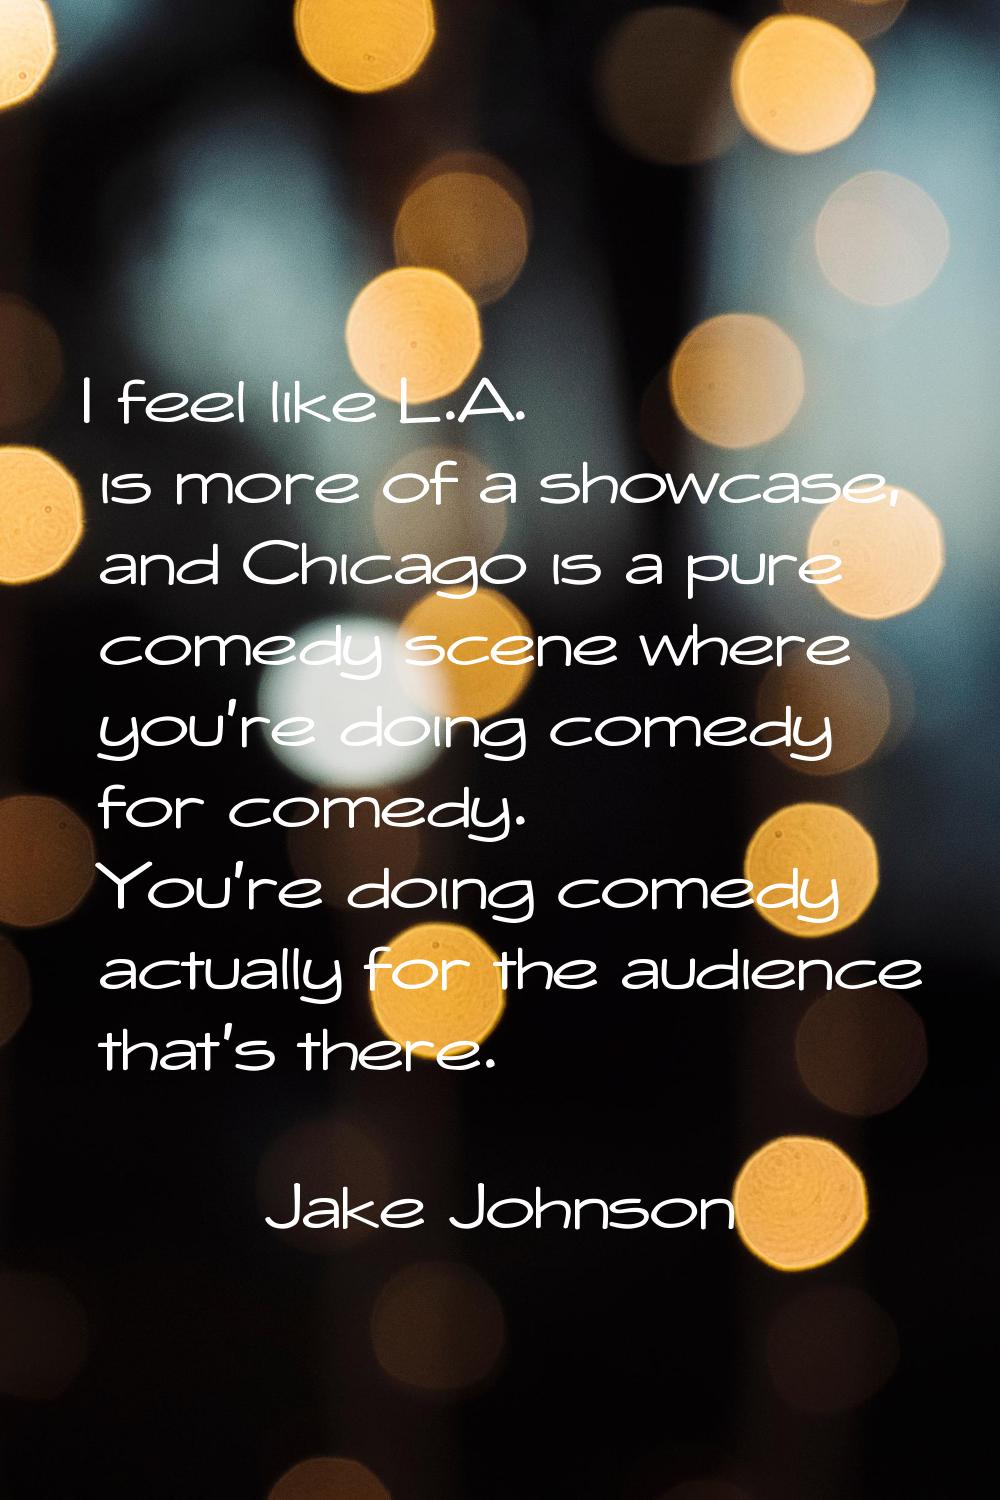 I feel like L.A. is more of a showcase, and Chicago is a pure comedy scene where you're doing comed